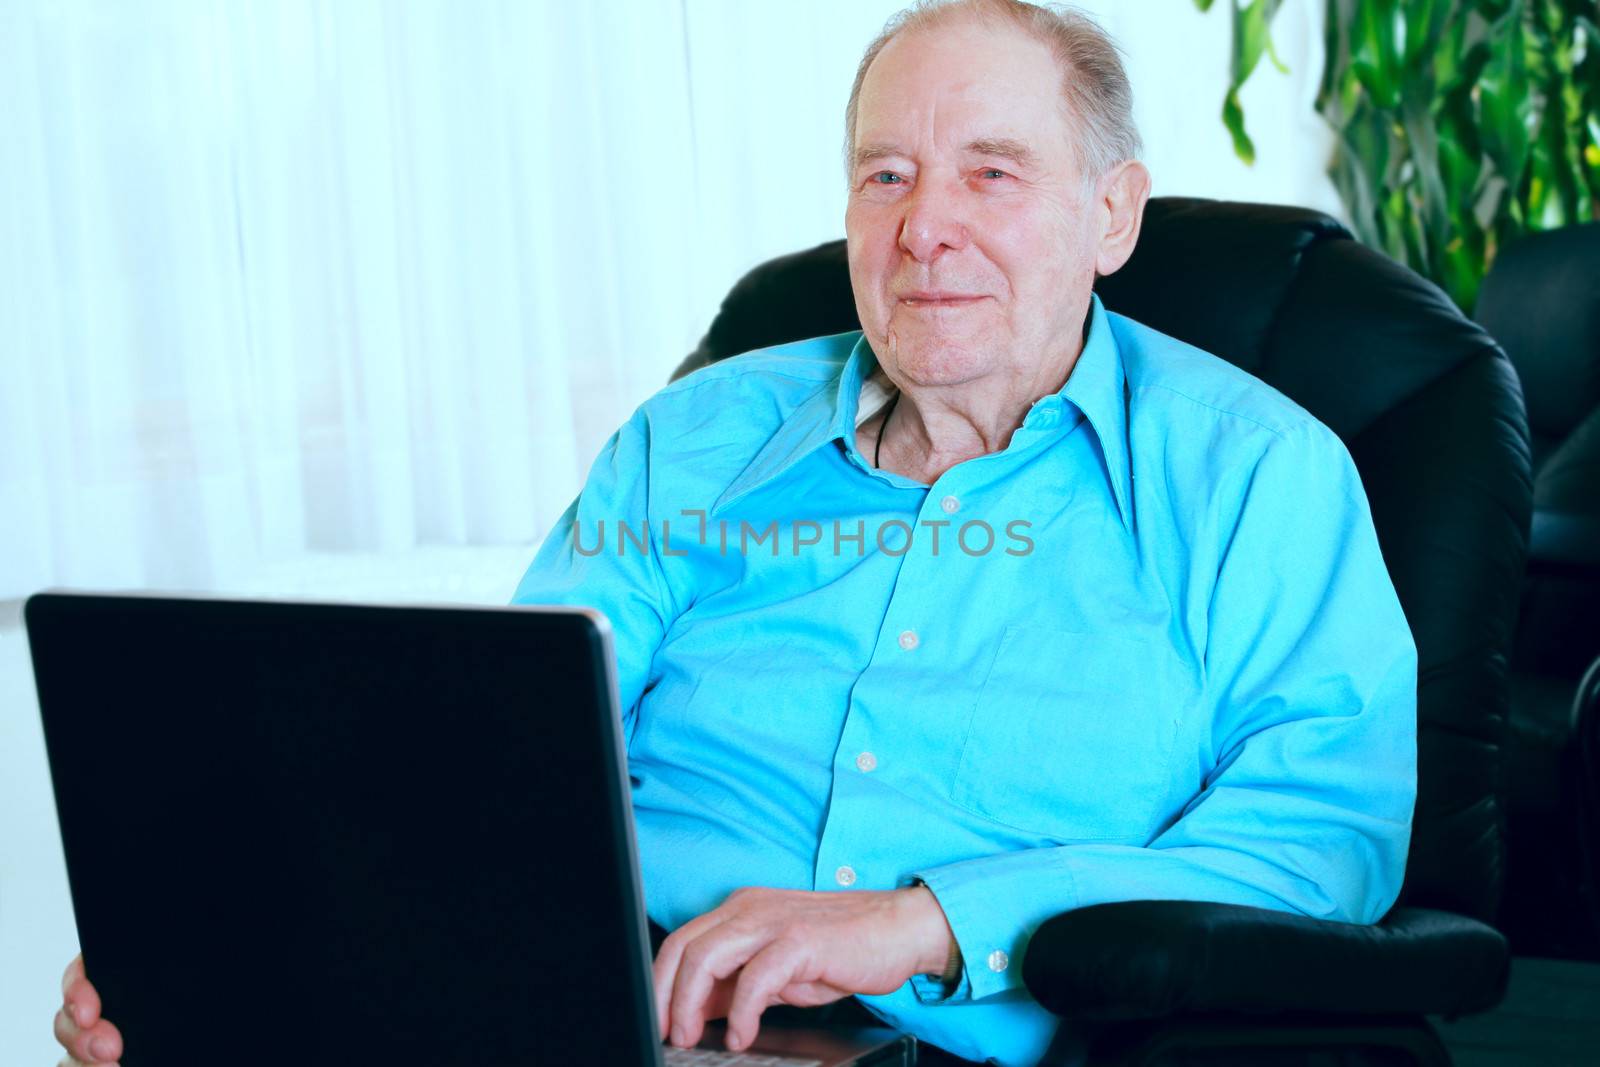 Elderly man using laptop computer sitting in leather recliner